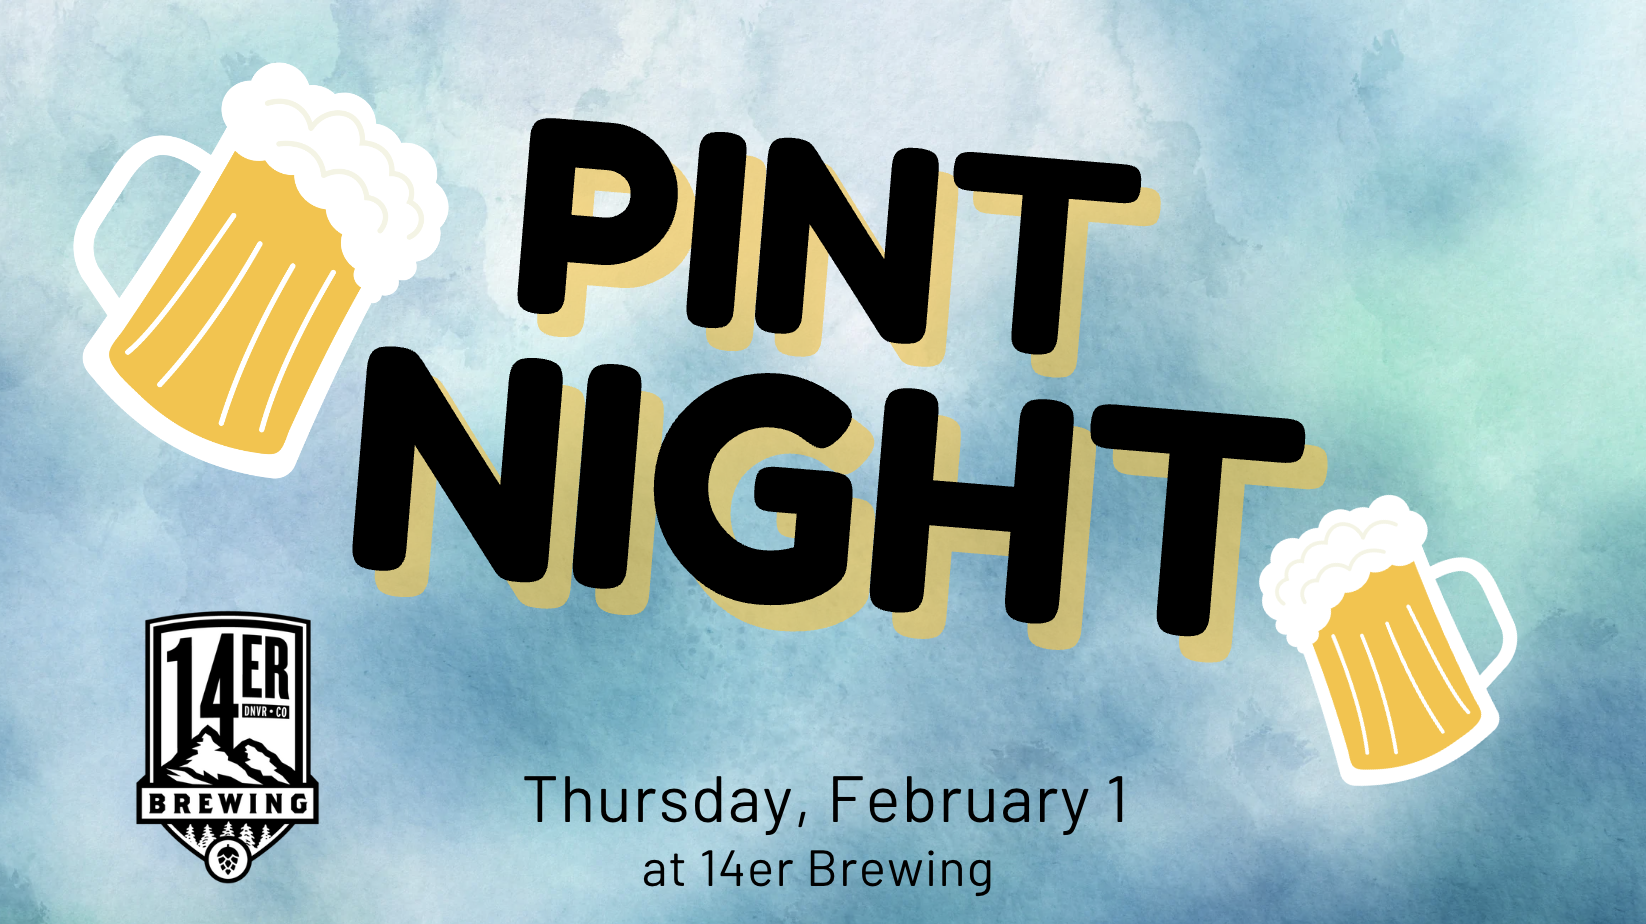 Pint Night at 14er Brewing Event Featured Image